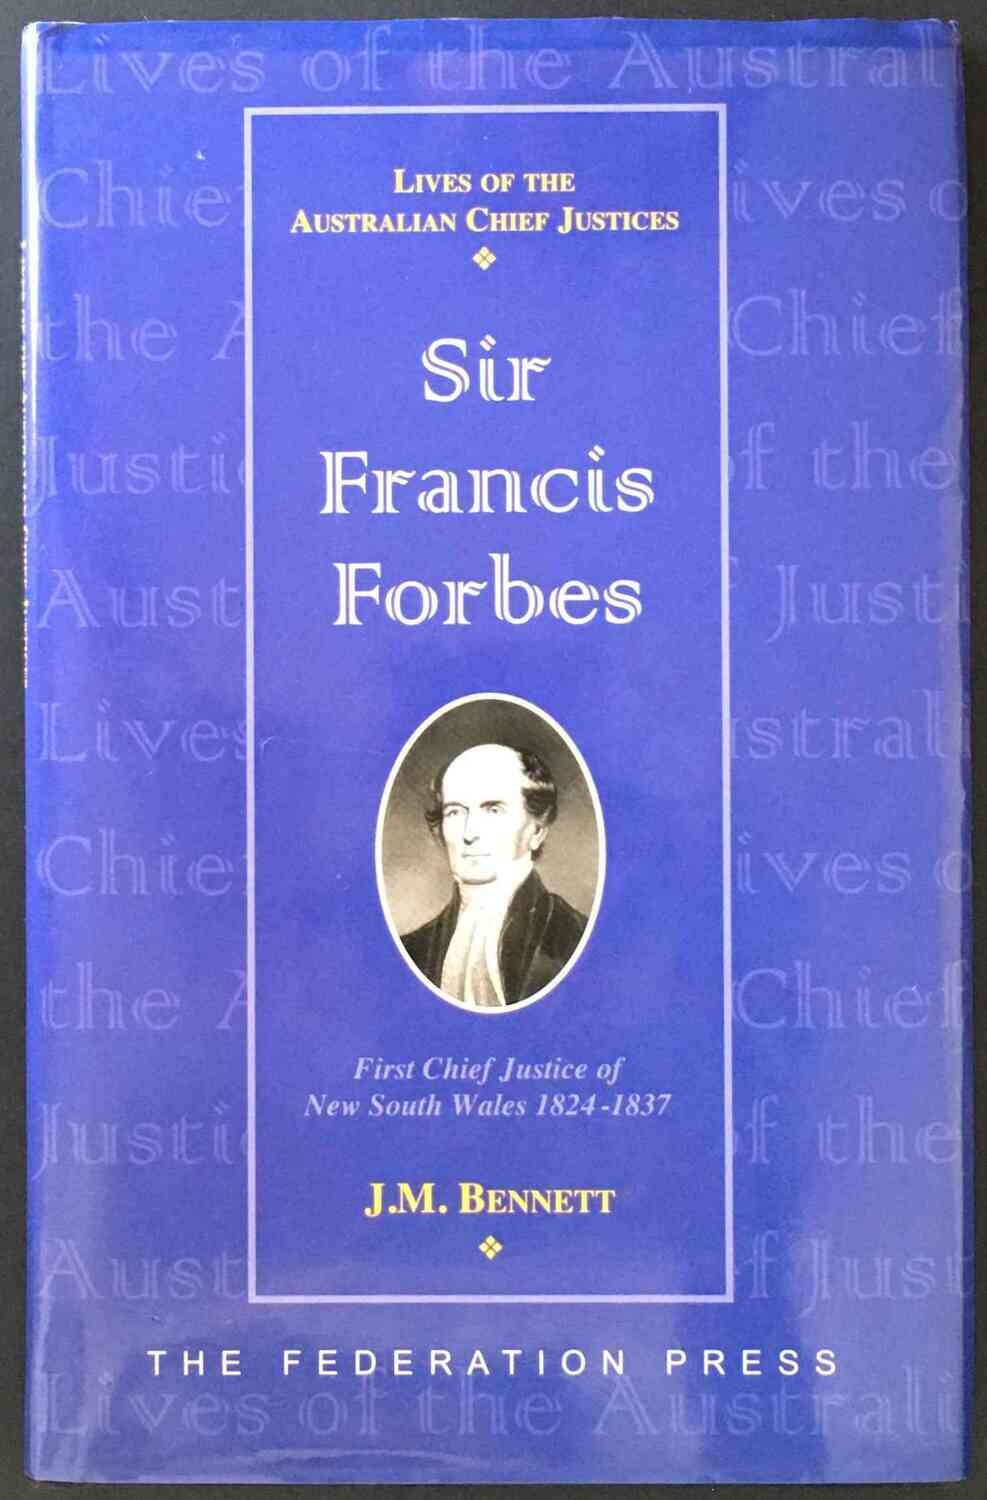 Sir Francis Forbes: First Chief Justice of New South Wales, 1823-1837 by J M Bennett